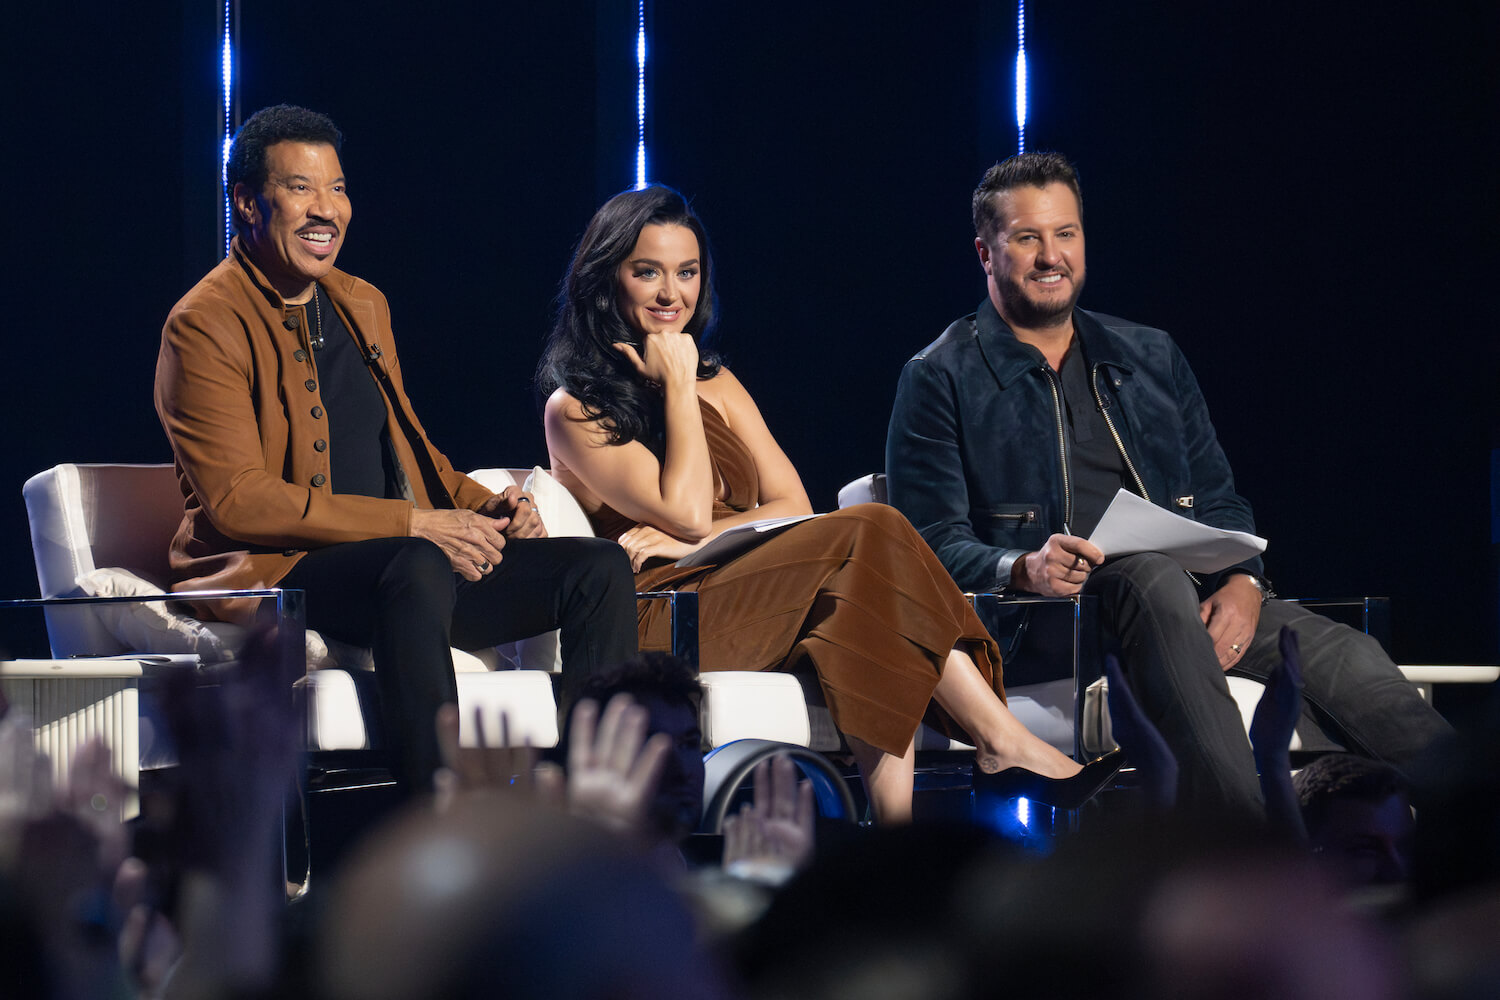 Lionel Richie, Katy Perry, and Luke Bryan sitting next to each other as judges on 'American Idol' Season 22